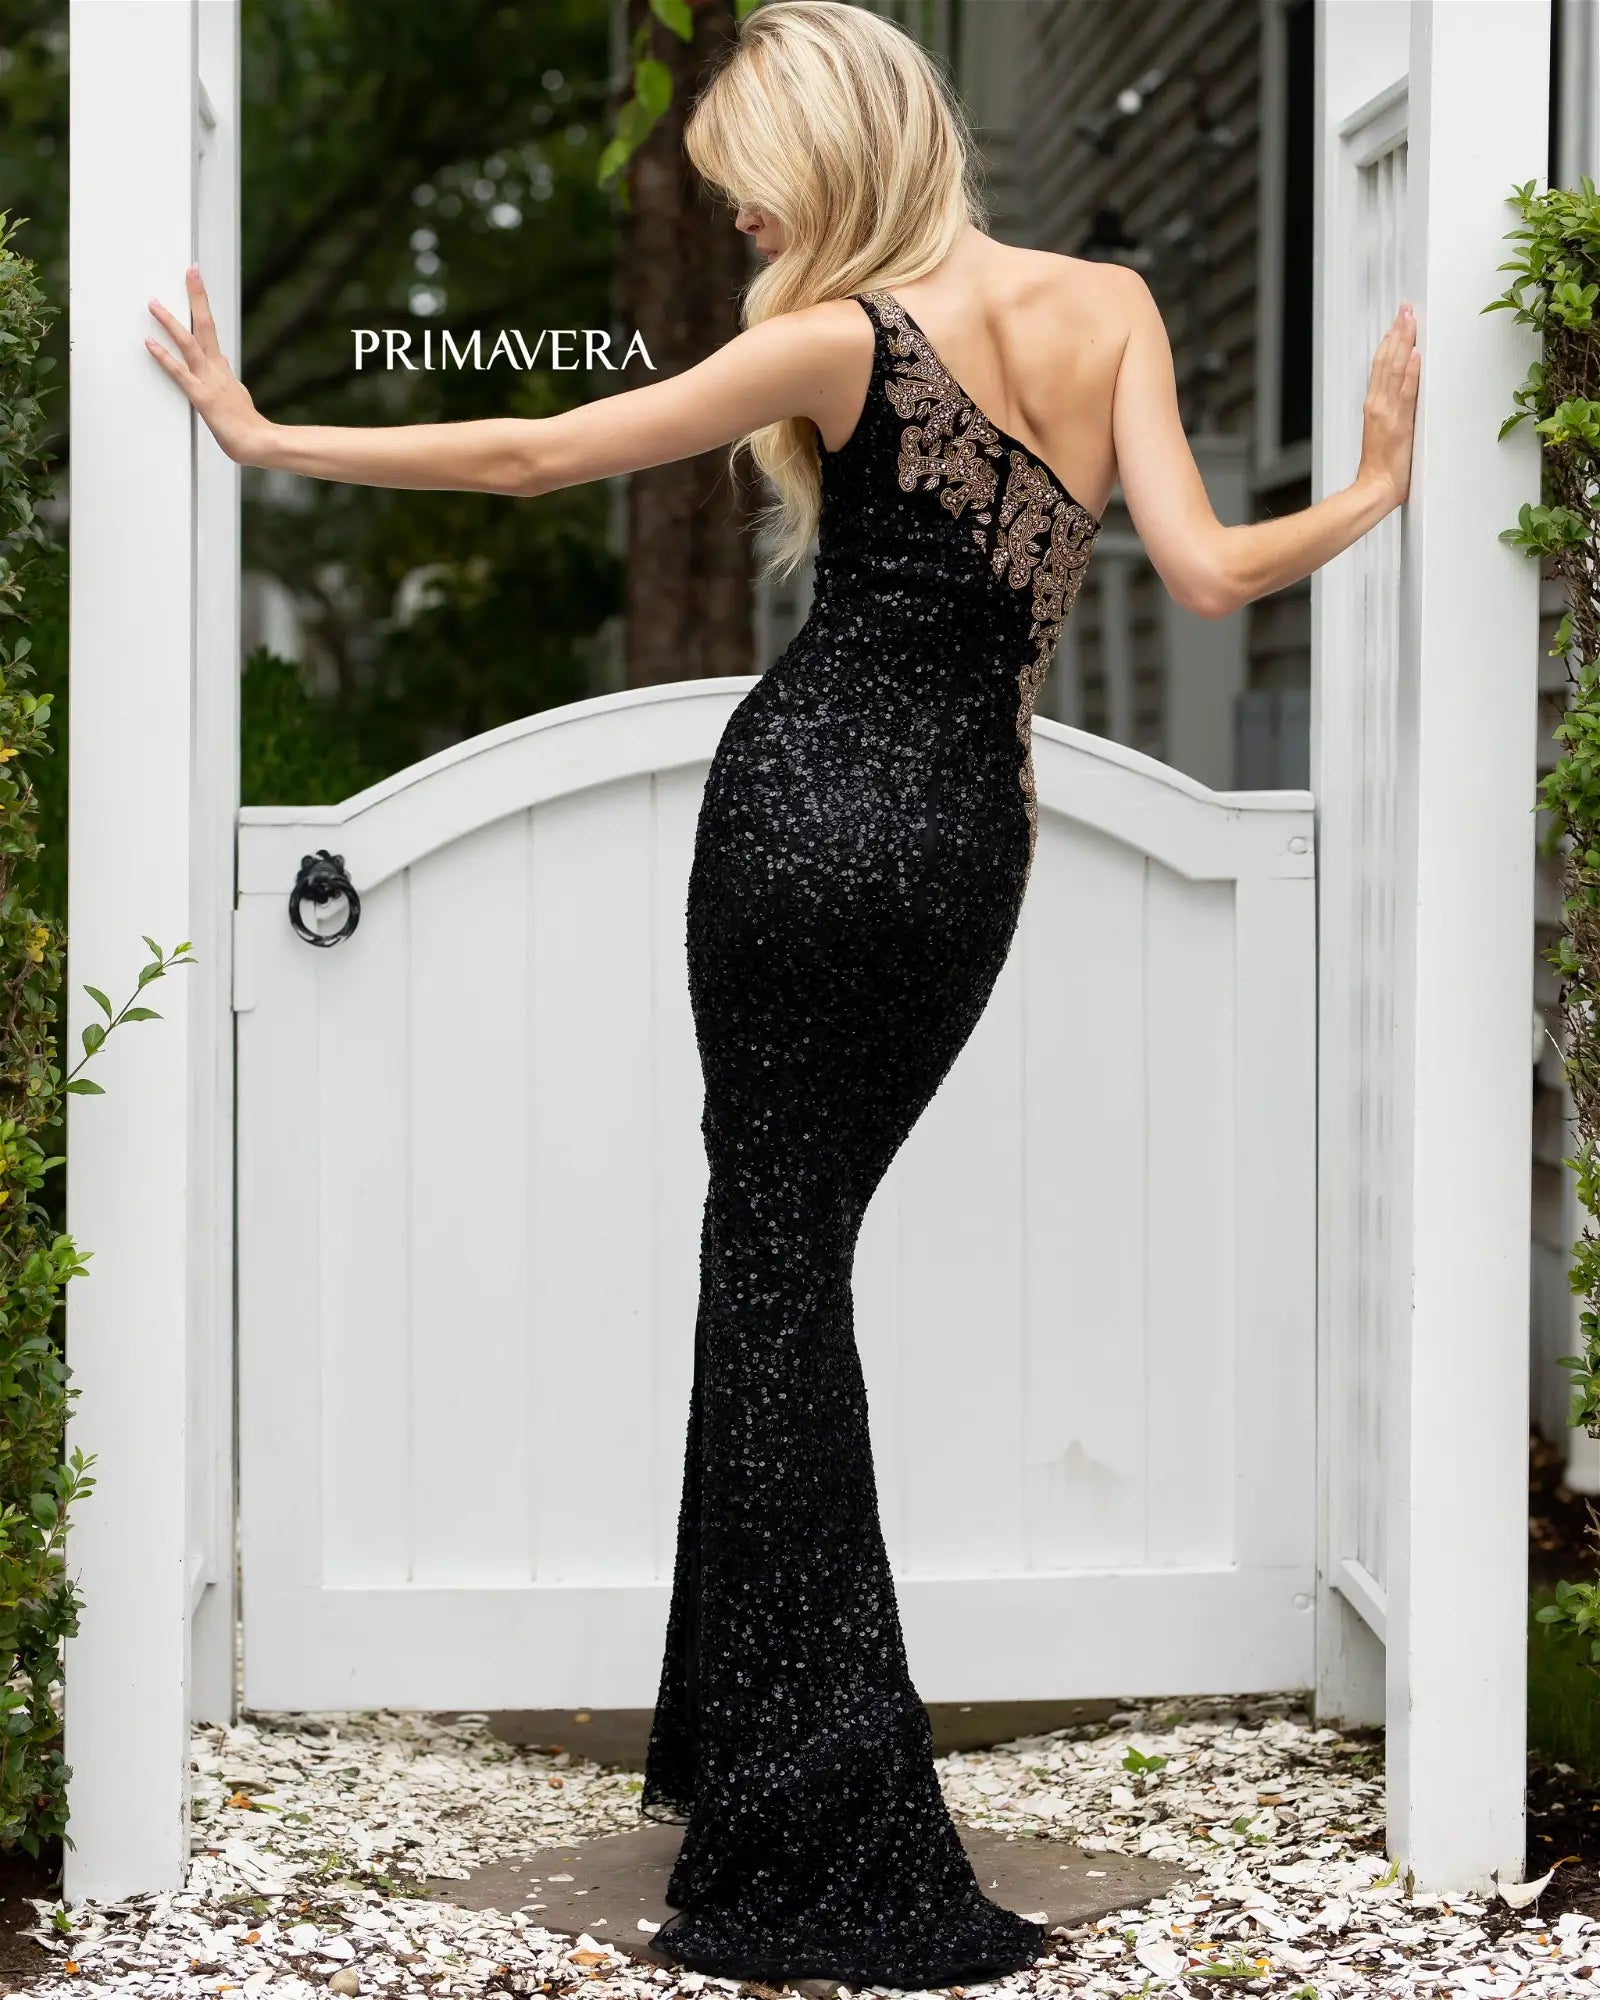 Primavera 3637 Sequined One Shoulder Evening Dress - A stunning gown with intricate sequin and bead embellishments, perfect for evening events.